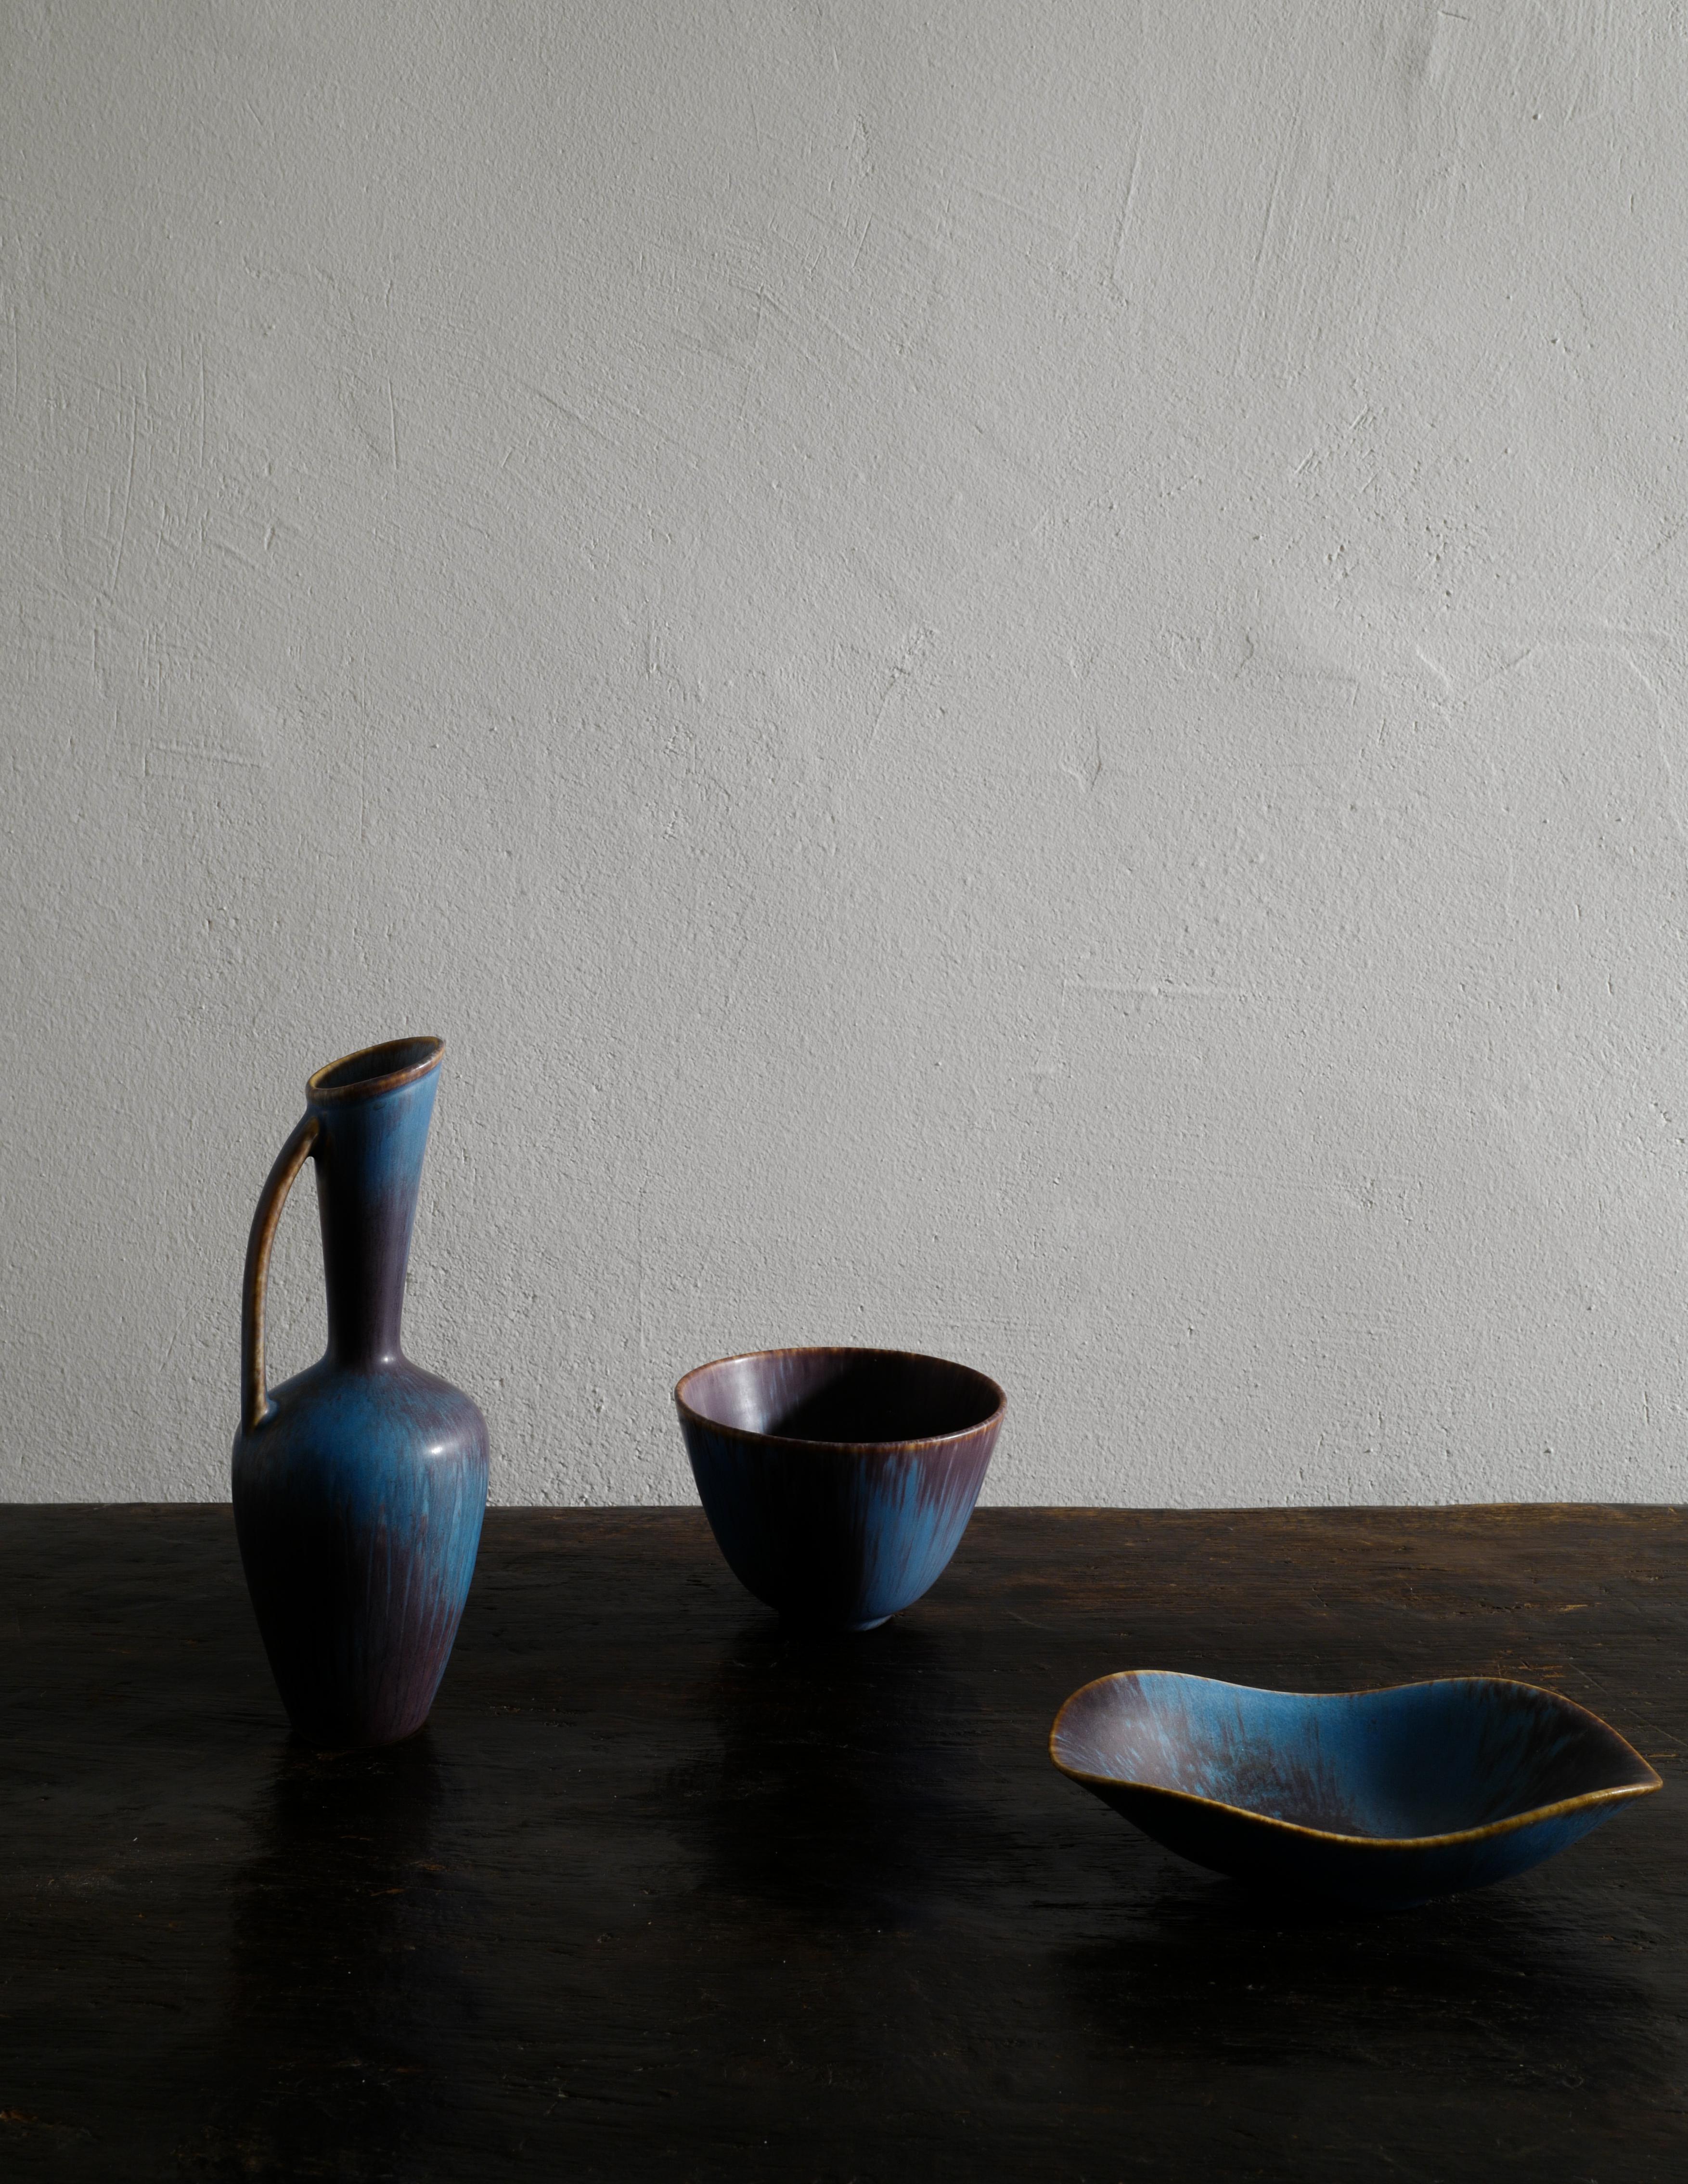 Rare and beautiful trio ceramics designed by Gunnar Nylund and produced for Rörstrand in Sweden in the 1950s. All are in good vintage condition and matching well together. All signed. 

Dimensions:
Pitcher: H: 23 cm W: 8 cm D: 8 cm
Bowl: H: 9 cm